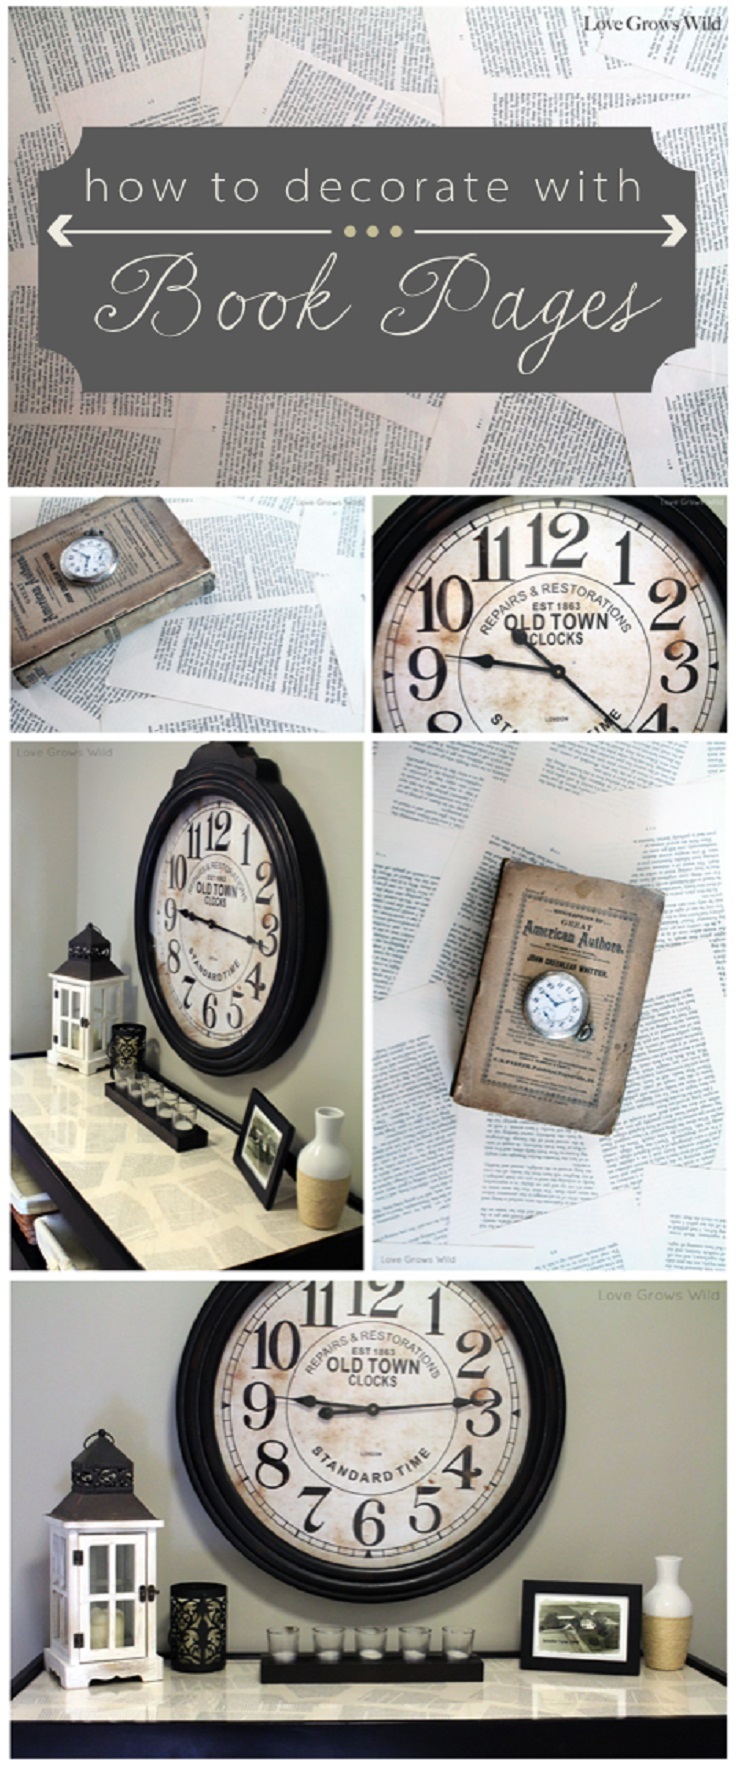 Decorating-with-Vintage-Books